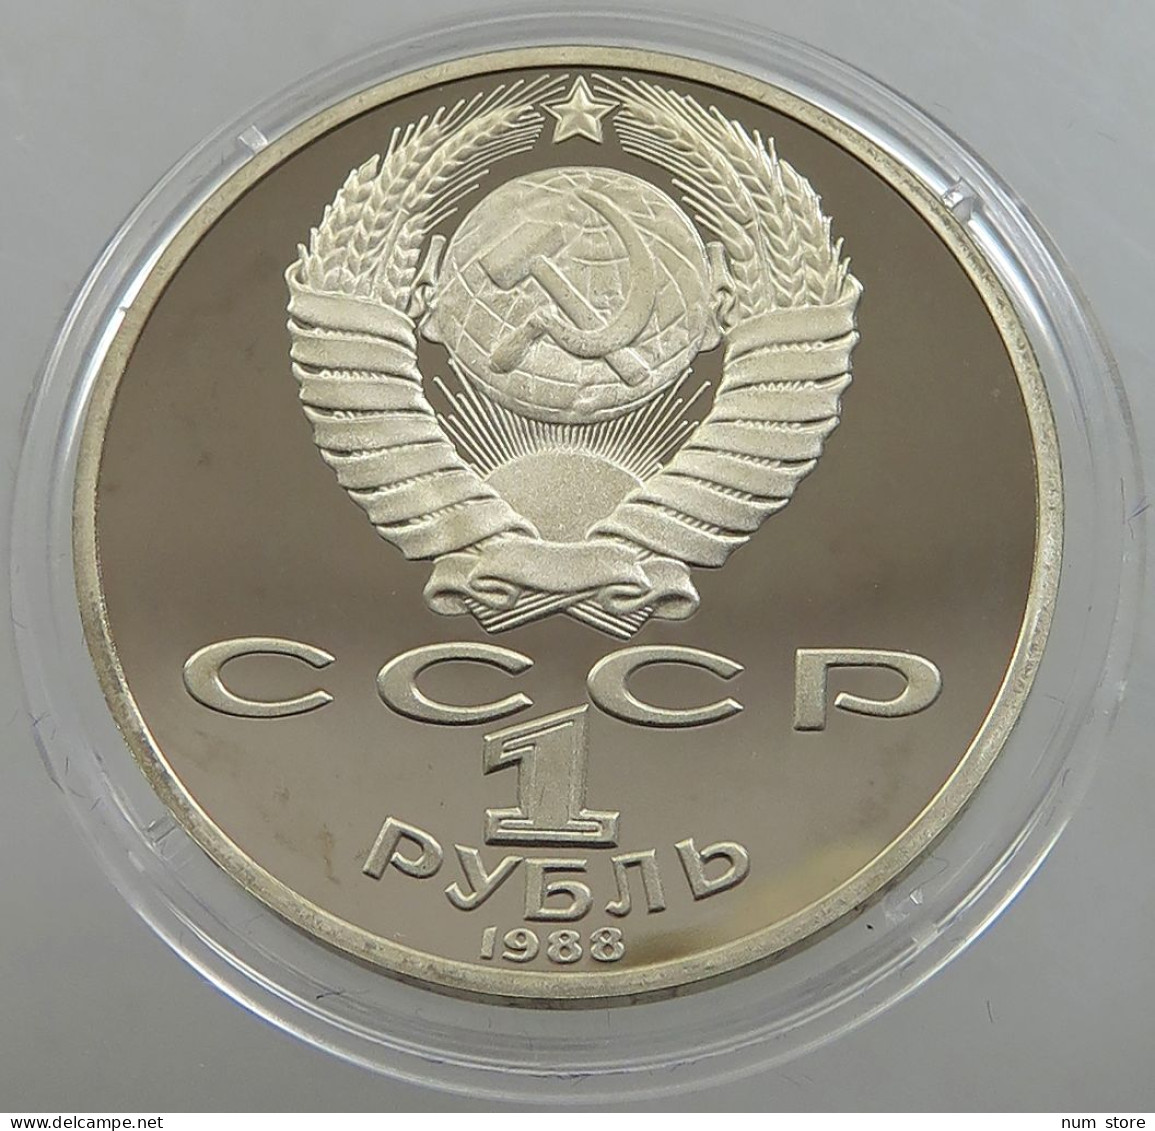 RUSSIA USSR 1 ROUBLE 1988 TOLSTOI #sm14 0519 - Rusland